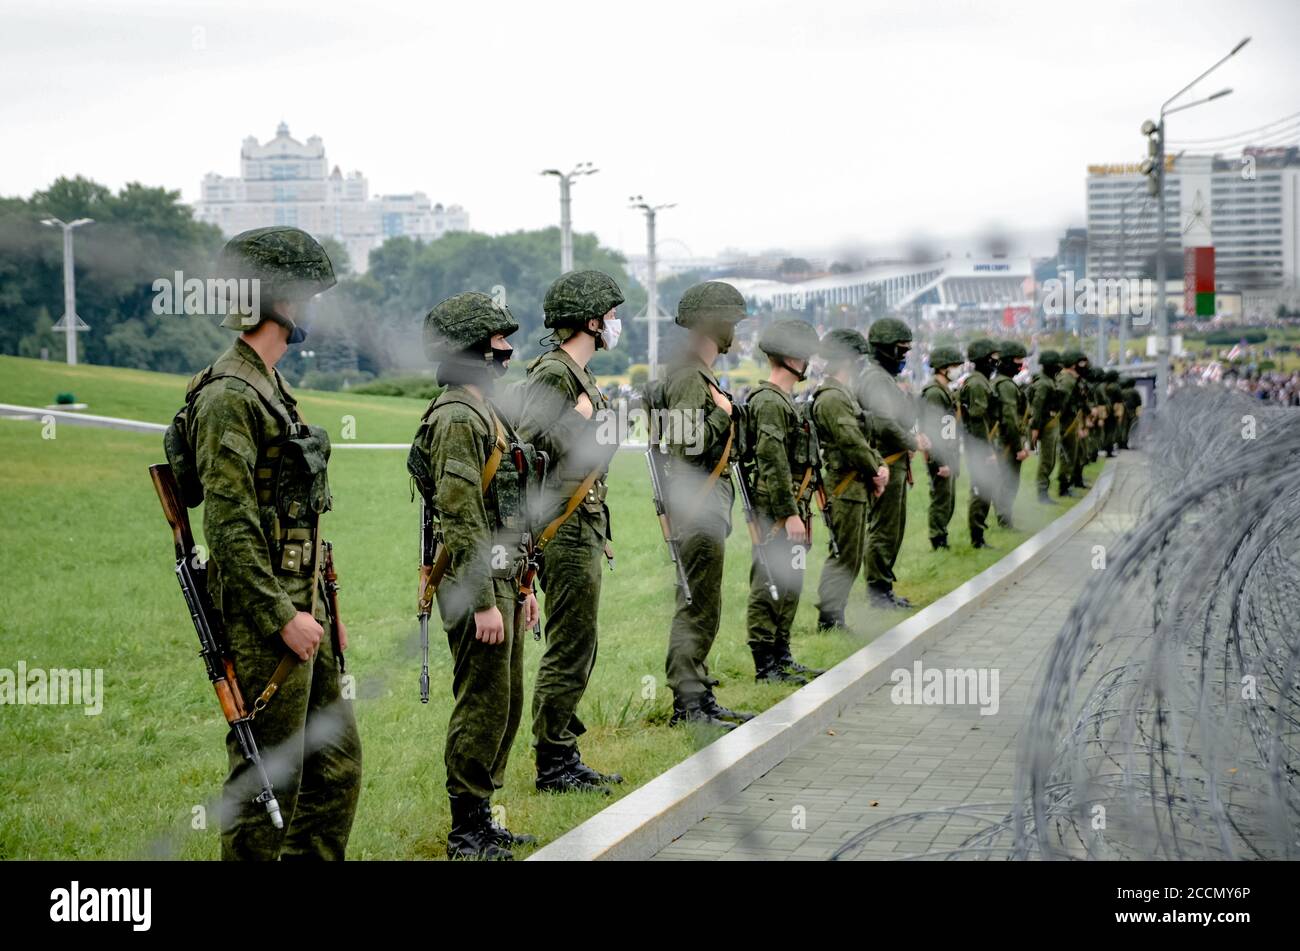 Minsk, Belarus - August 23, 2020: Belarusian people participate in peaceful protest against special police units and soldiers after presidential elect Stock Photo